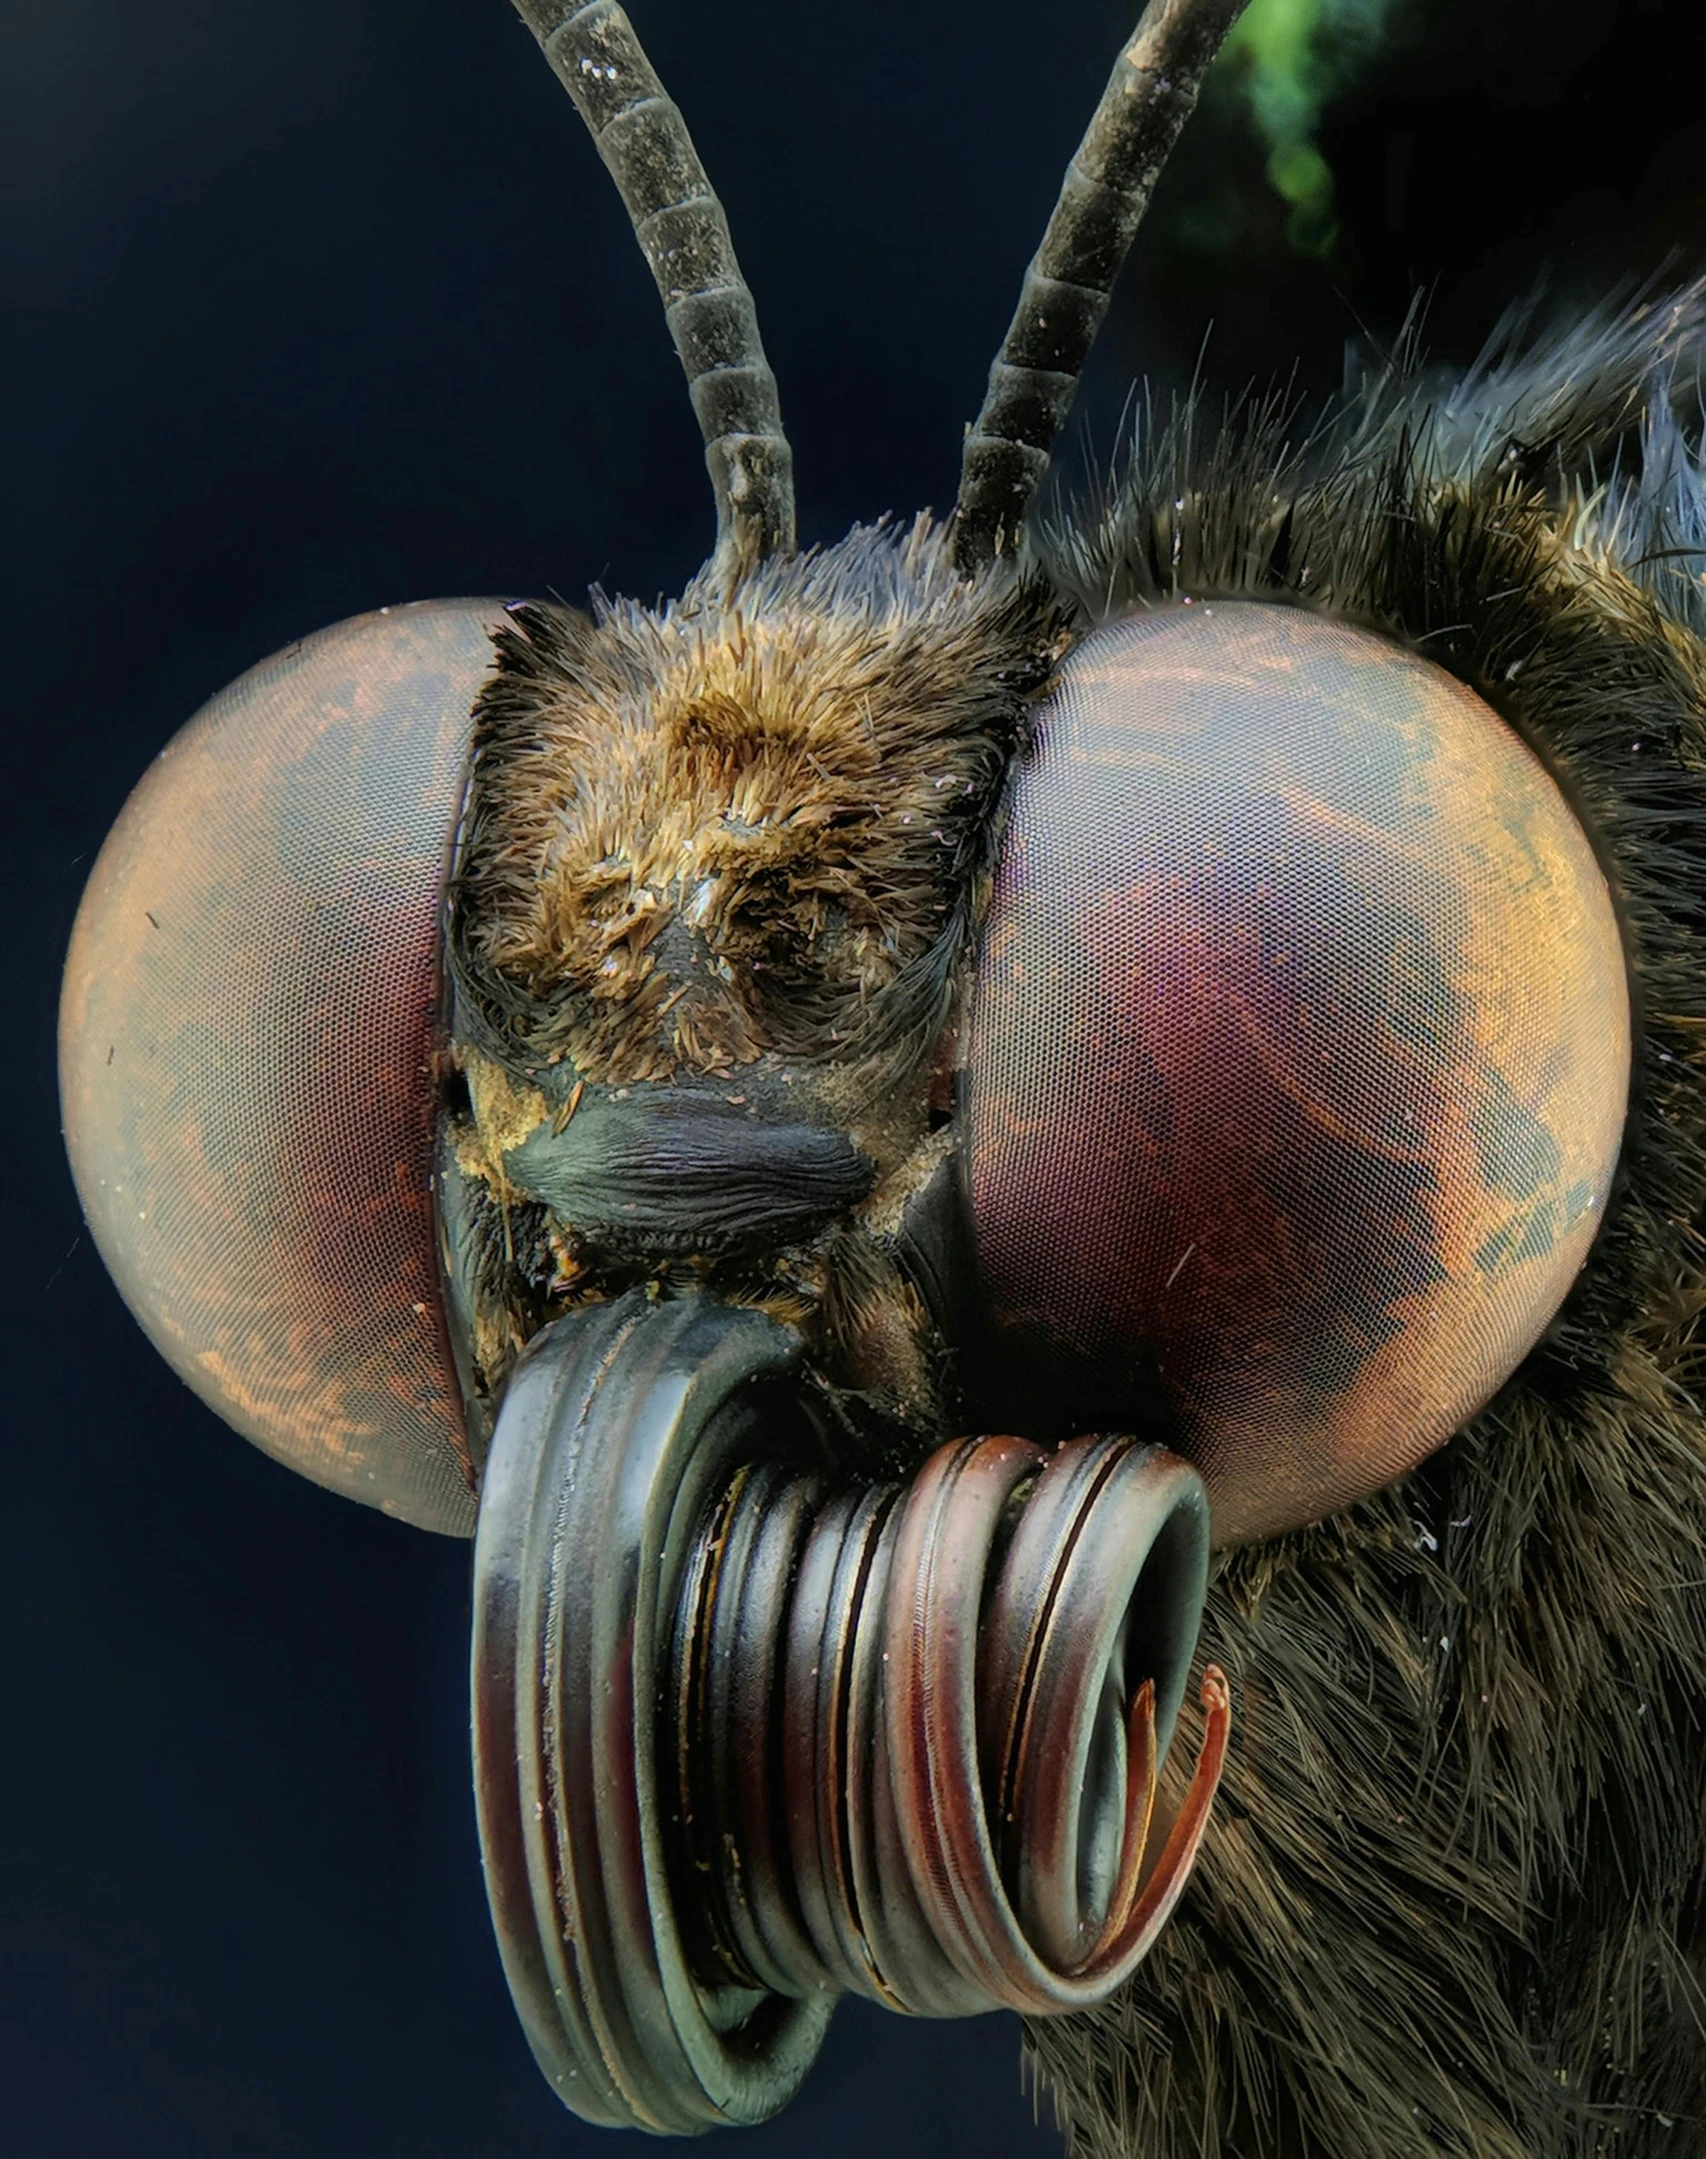 a close up of a close up of a bee's face, by Dave Allsop, wearing a monocle, hyperdetailed photograph, large mosquito wings, camera close up